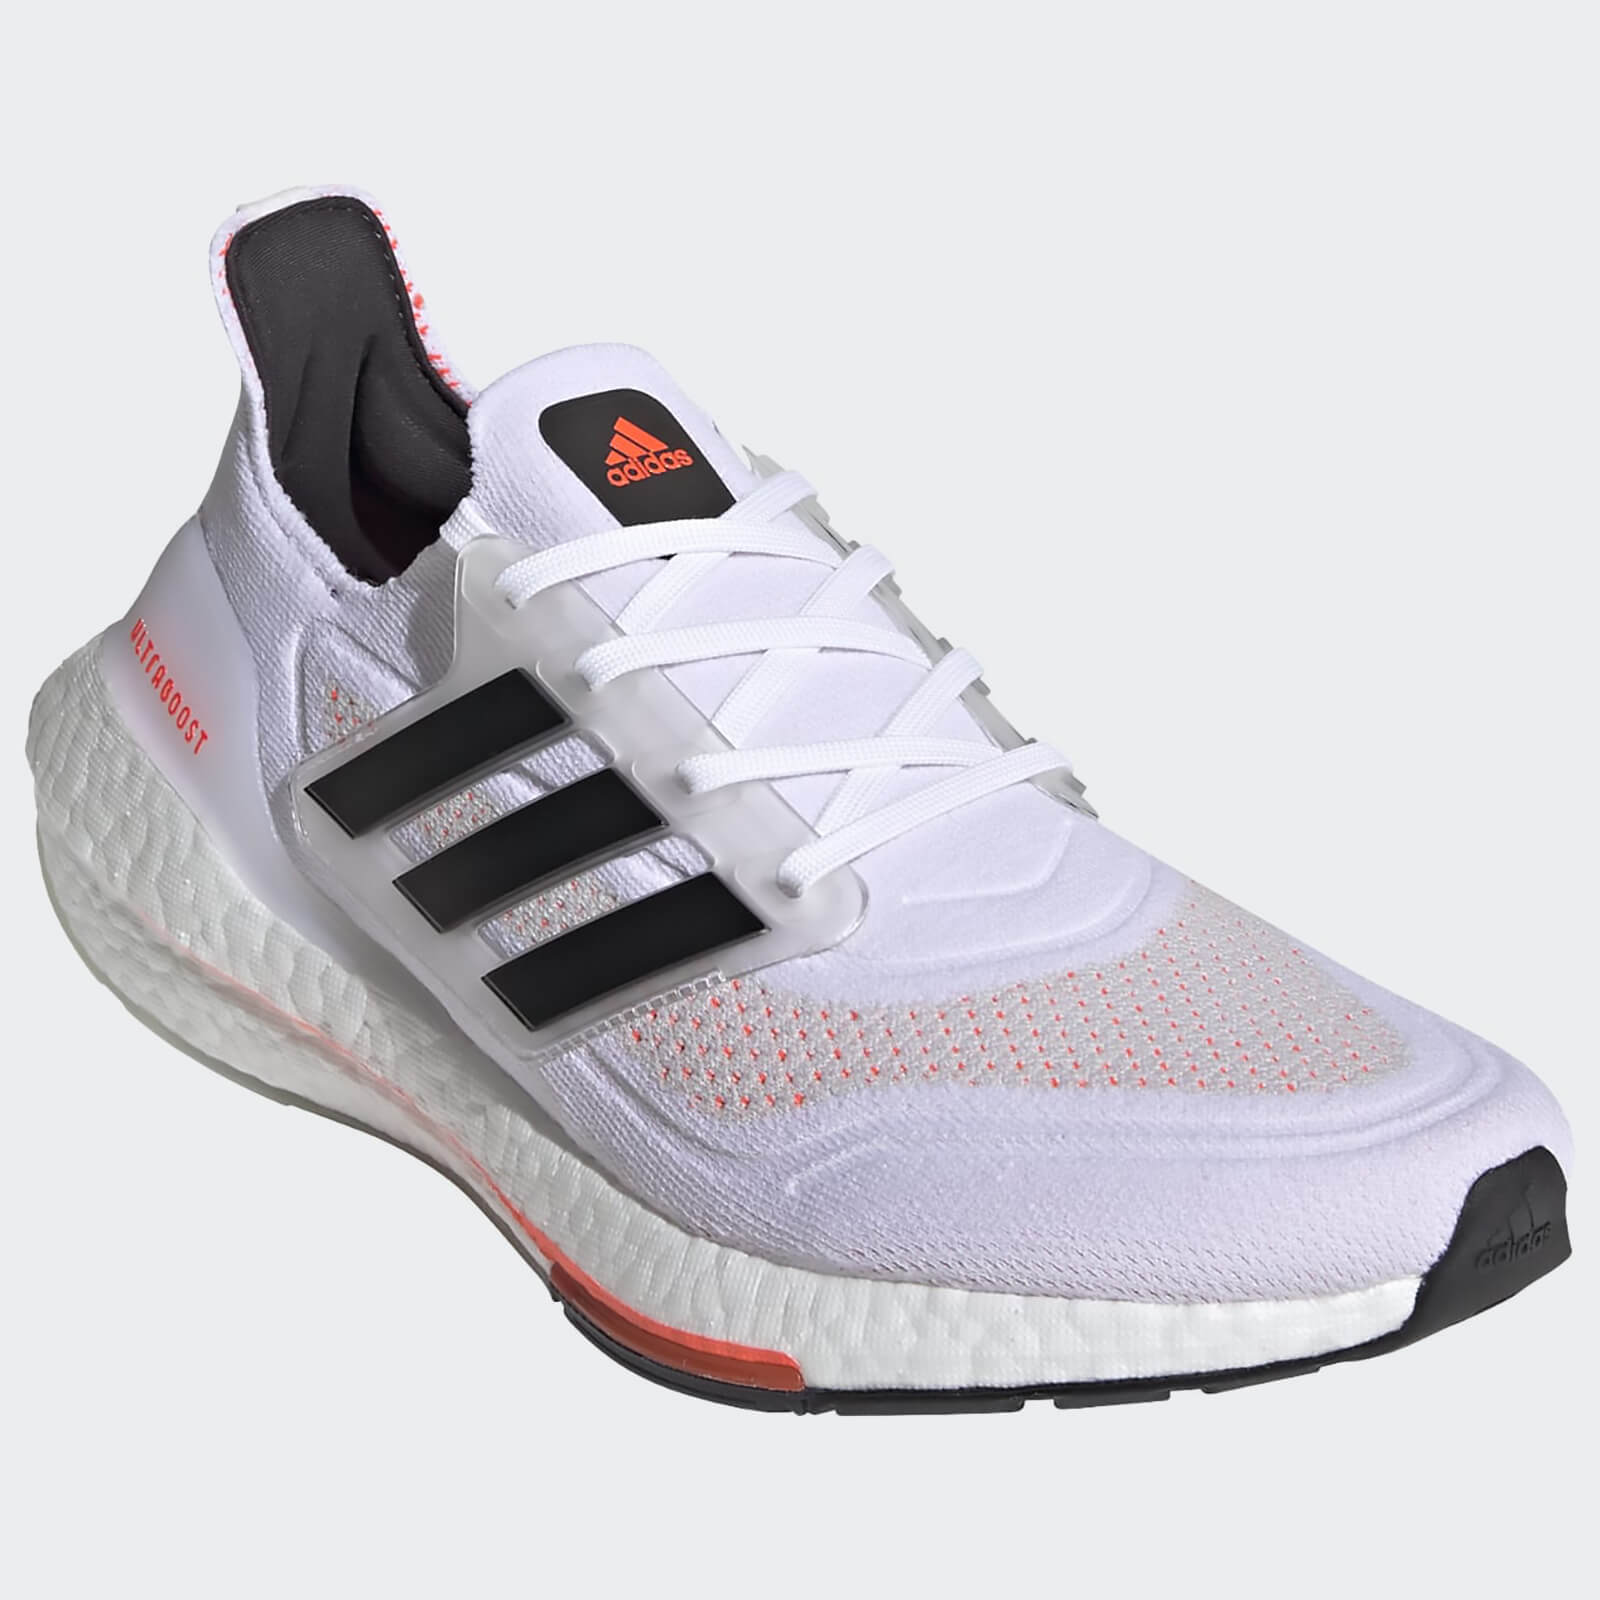 adidas Ultra Boost 21 Running Shoes - Ftwr White/Core Black/Solar Red - US 7.5/UK 7